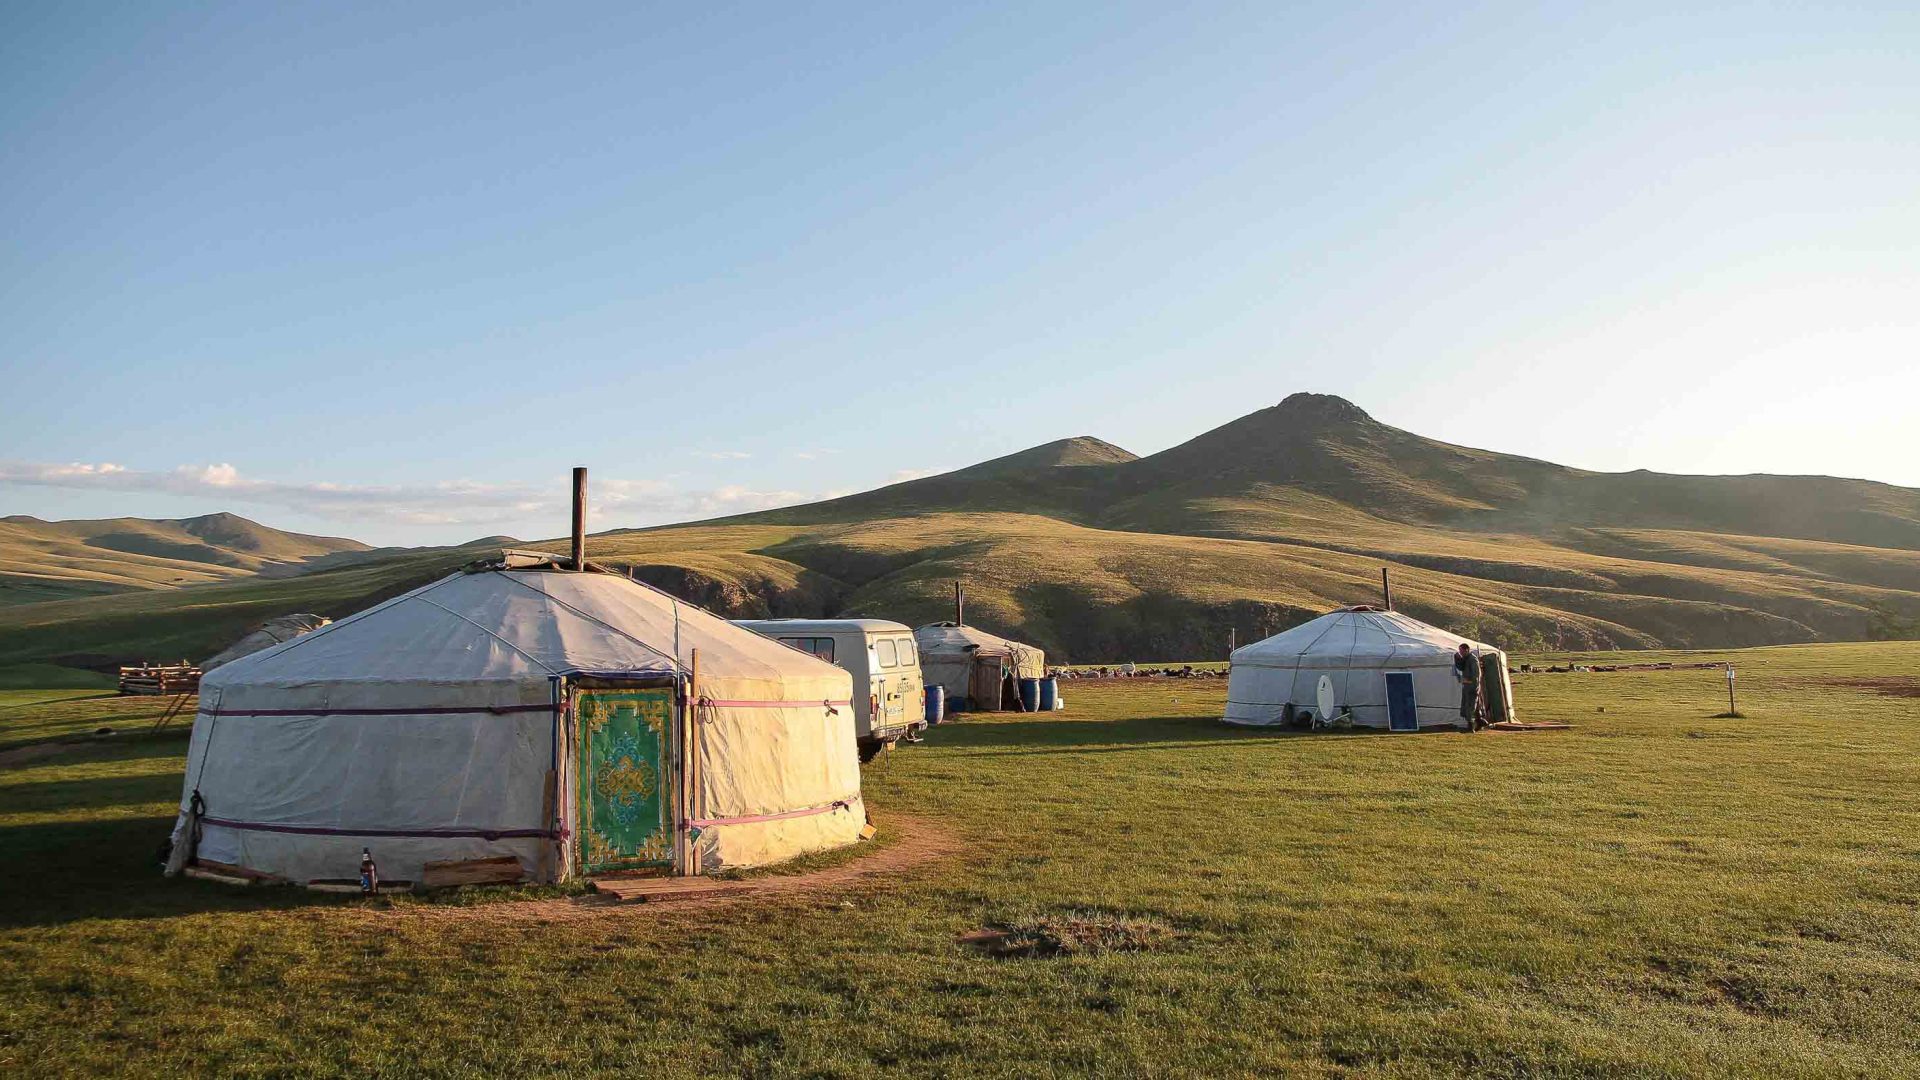 Yurts in the plains of Mongolia.